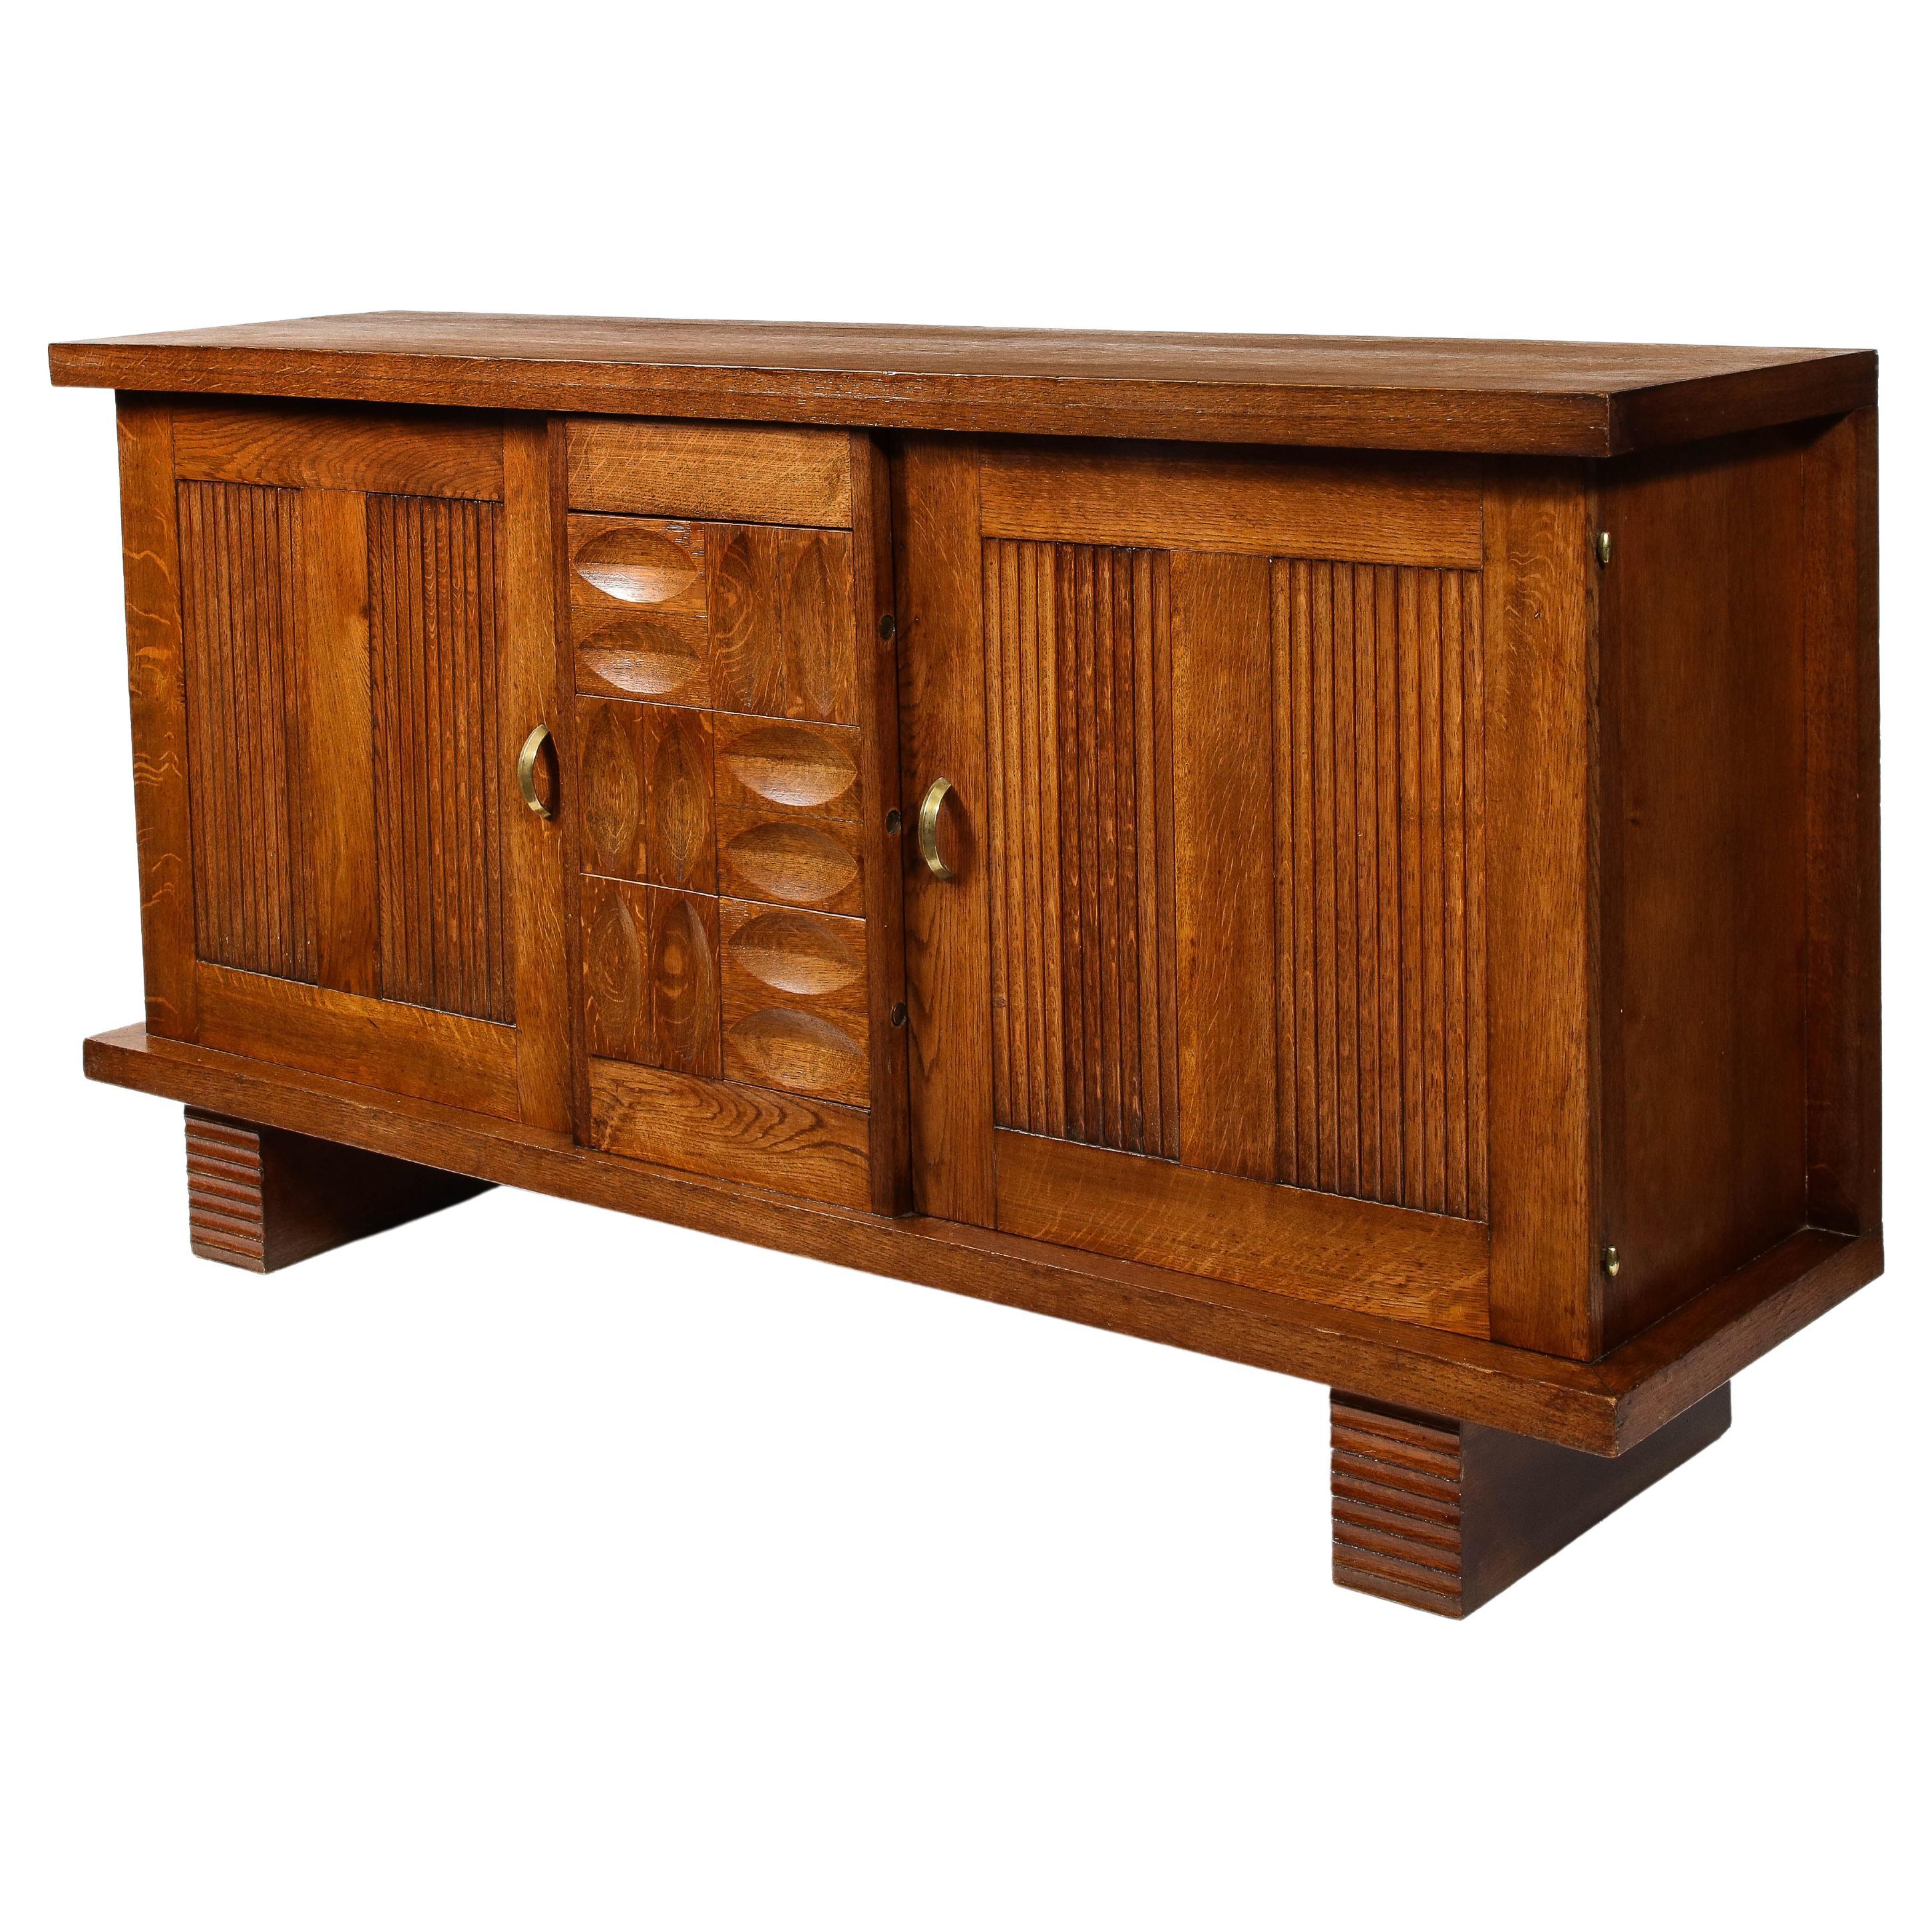 An exceptional credenza by Charles Dudouyt in oak. There are many unique details on this very well-proportioned piece. A stand out is the concealed drawer release mechanism— a little button hidden on the side of each drawer that unlocks them— an